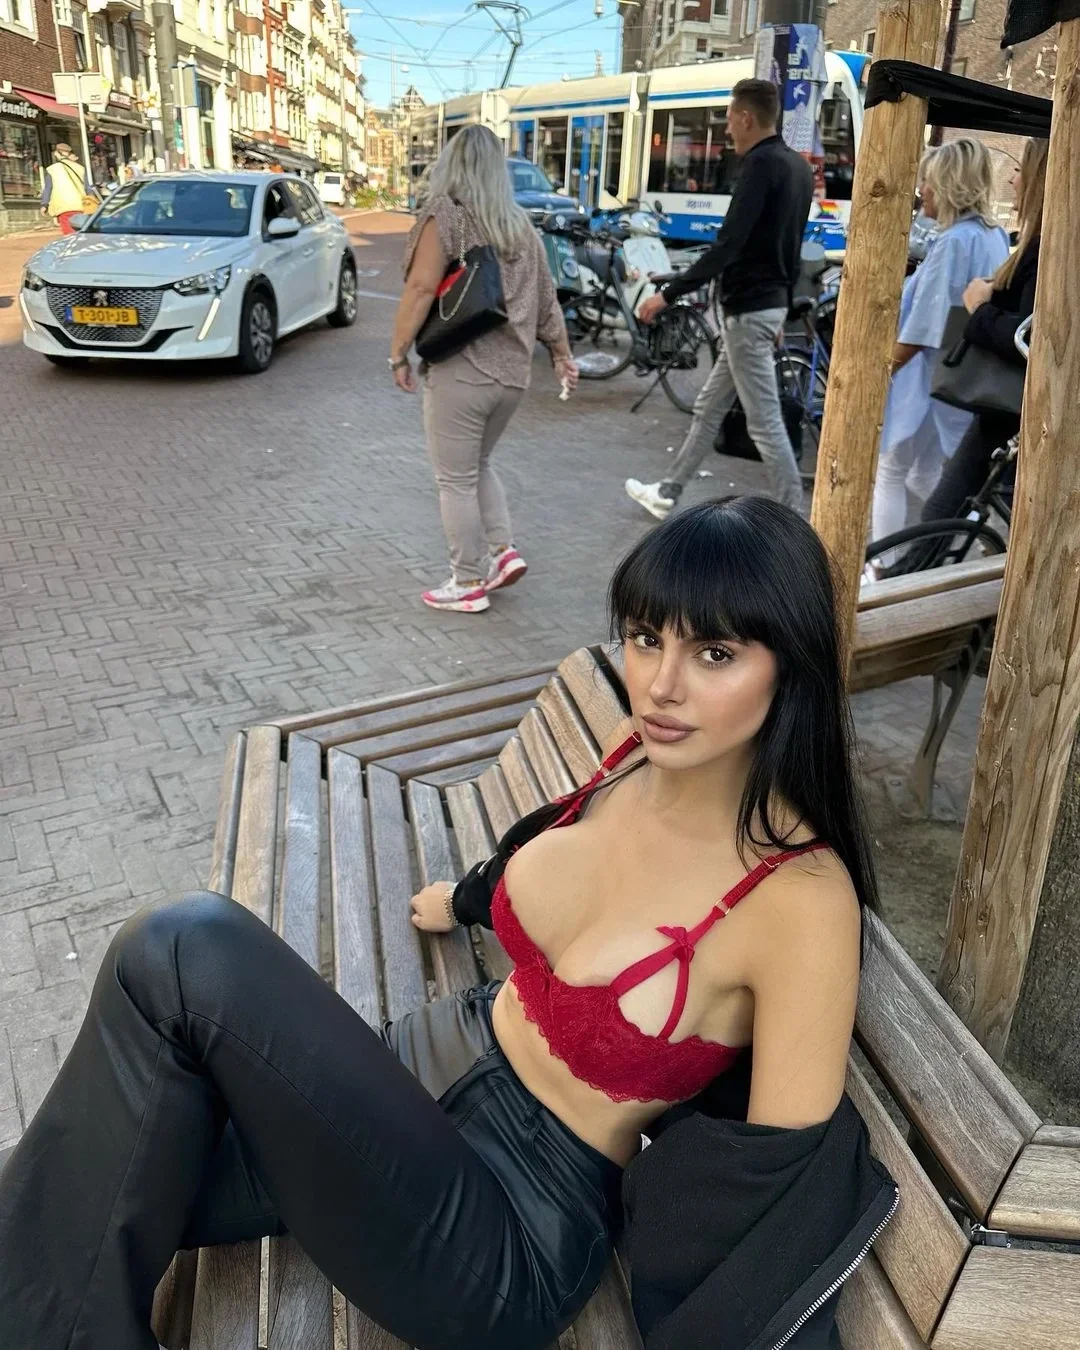 Watch the Photo by Jizzstagram with the username @jizzstagram, posted on March 4, 2024. The post is about the topic Instagram & Reddit hotties. and the text says 'Martina Vismara'